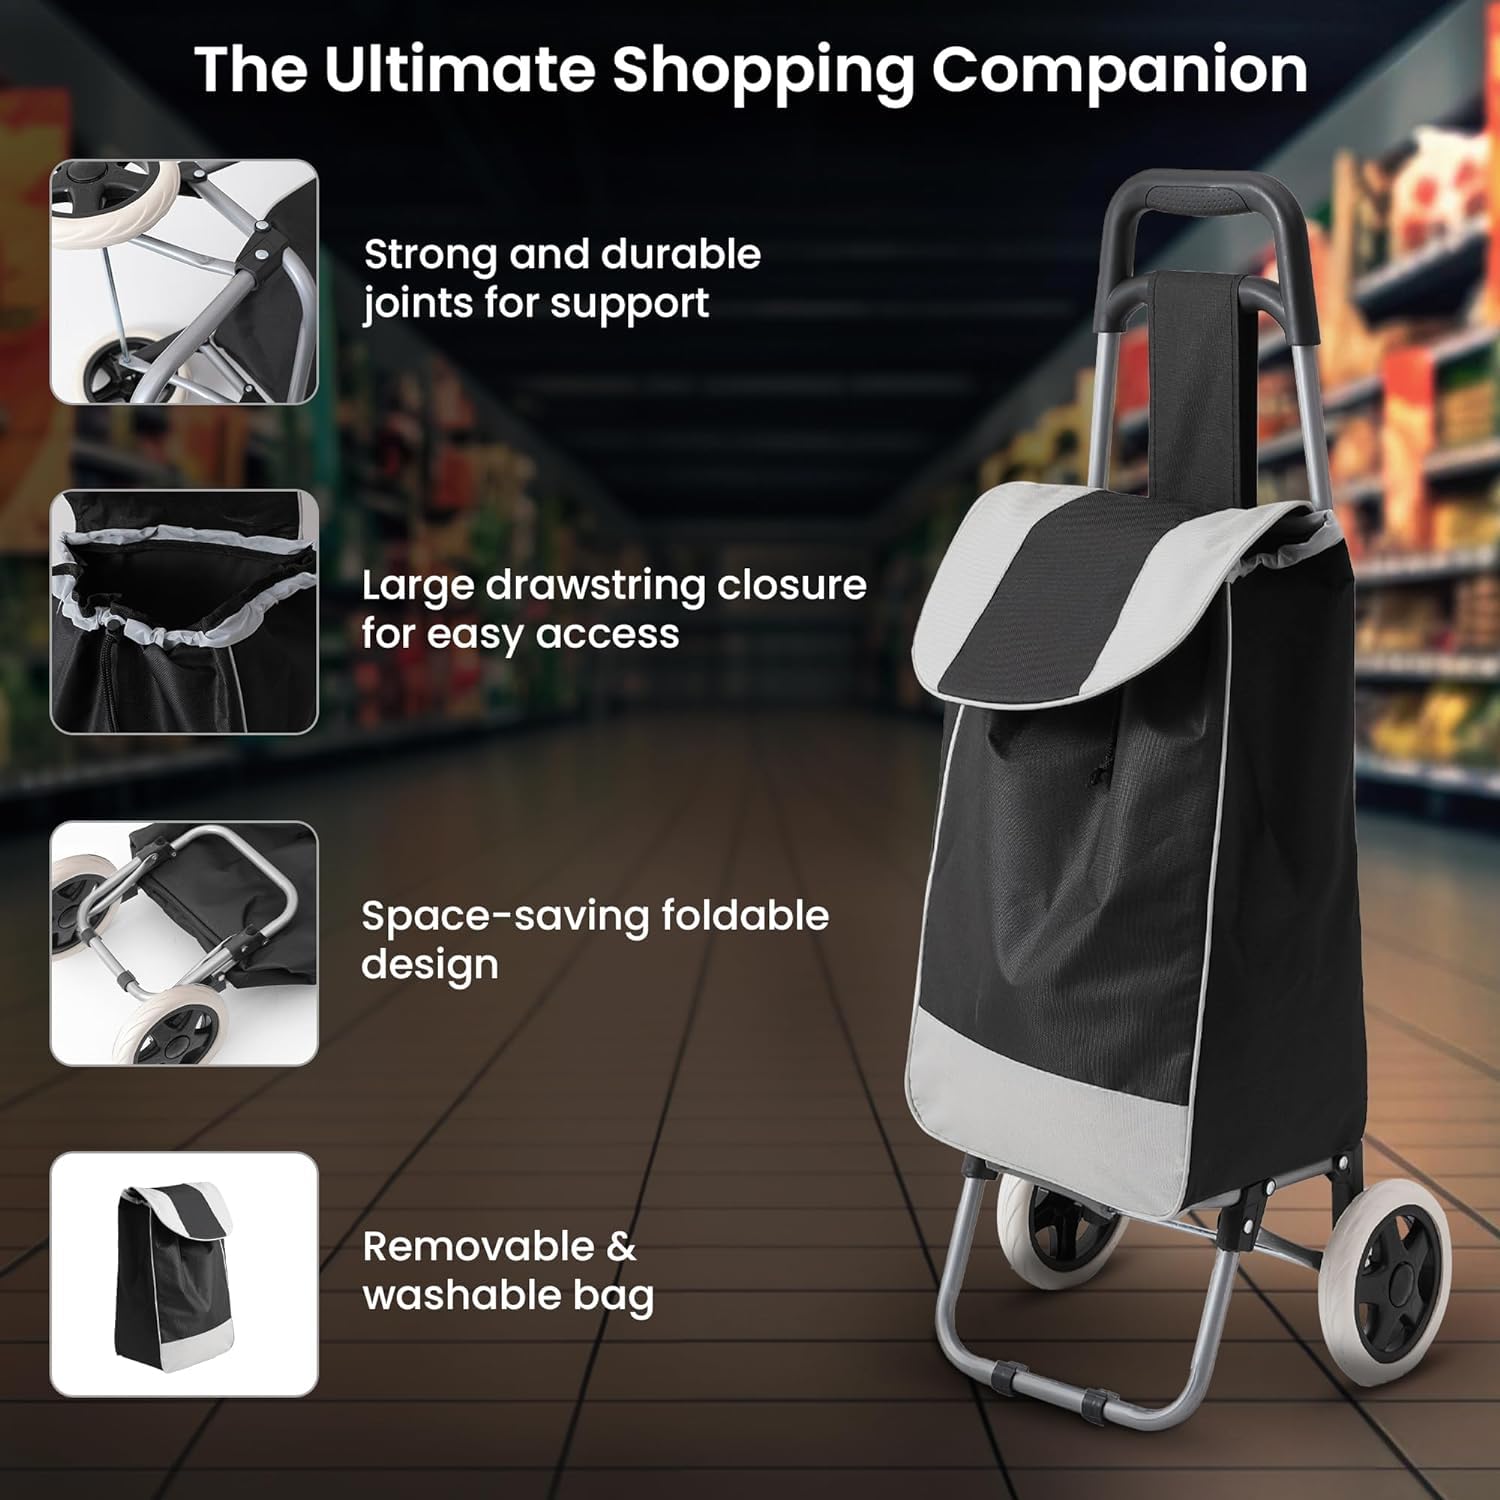 Cheston Shopping Bag for Grocery Foldable Shopping Trolly Bag with Wheels | Large & Lightweight Shopping Trolly Bag with 30 Kg Capacity | Water-Proof Fabric with Multiple Pockets (Black & White)